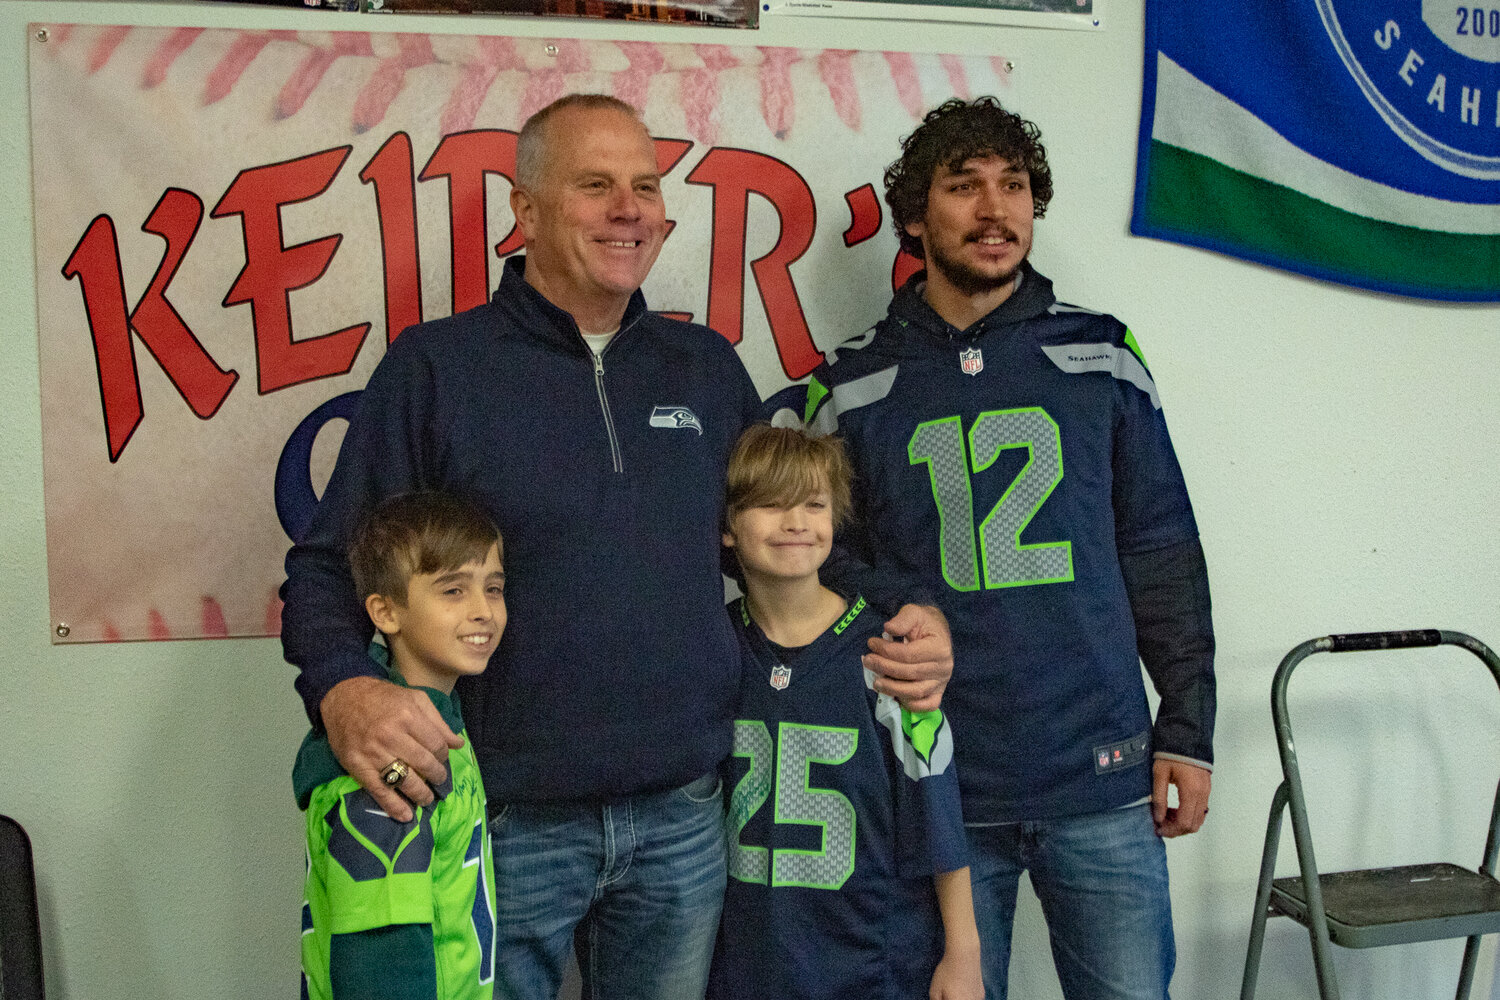 Former Seattle Seahawks kicker Norm Johnson, also known as "Mr. Automatic," poses with Cohen, in the green, and Bernard Collette along with their father, Tom Collette, at Keiper's Cards on Saturday, Dec. 2. during a card and memorabilia show in downtown Centralia.